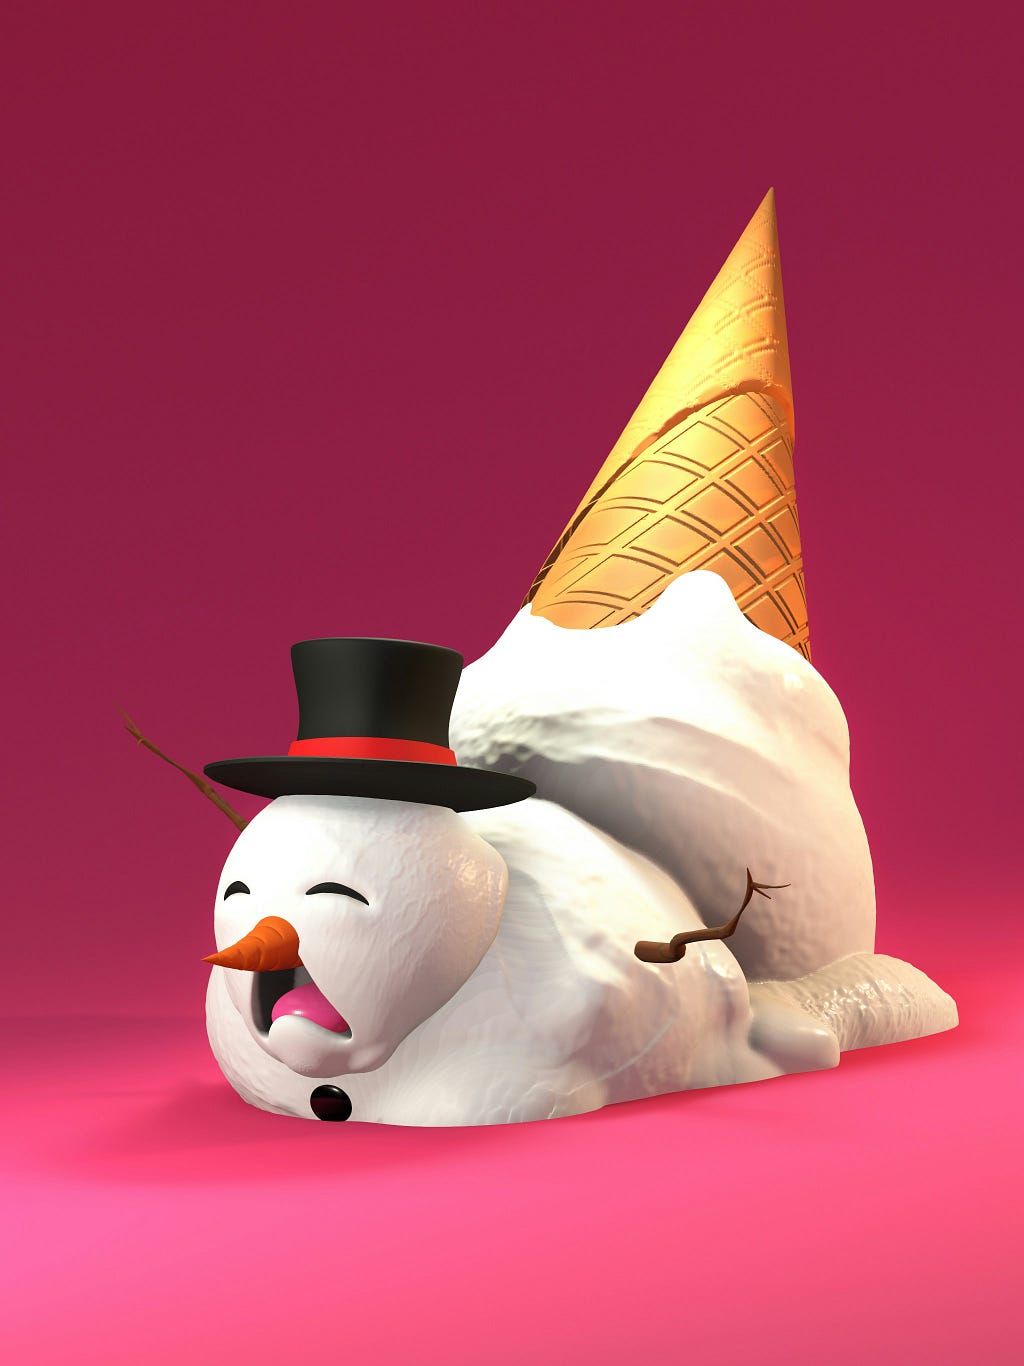 A stylised ice-cream cone has fallen on the ground. The balls of ice-cream are depicted as a snowman that is lying down and crying as it melts.